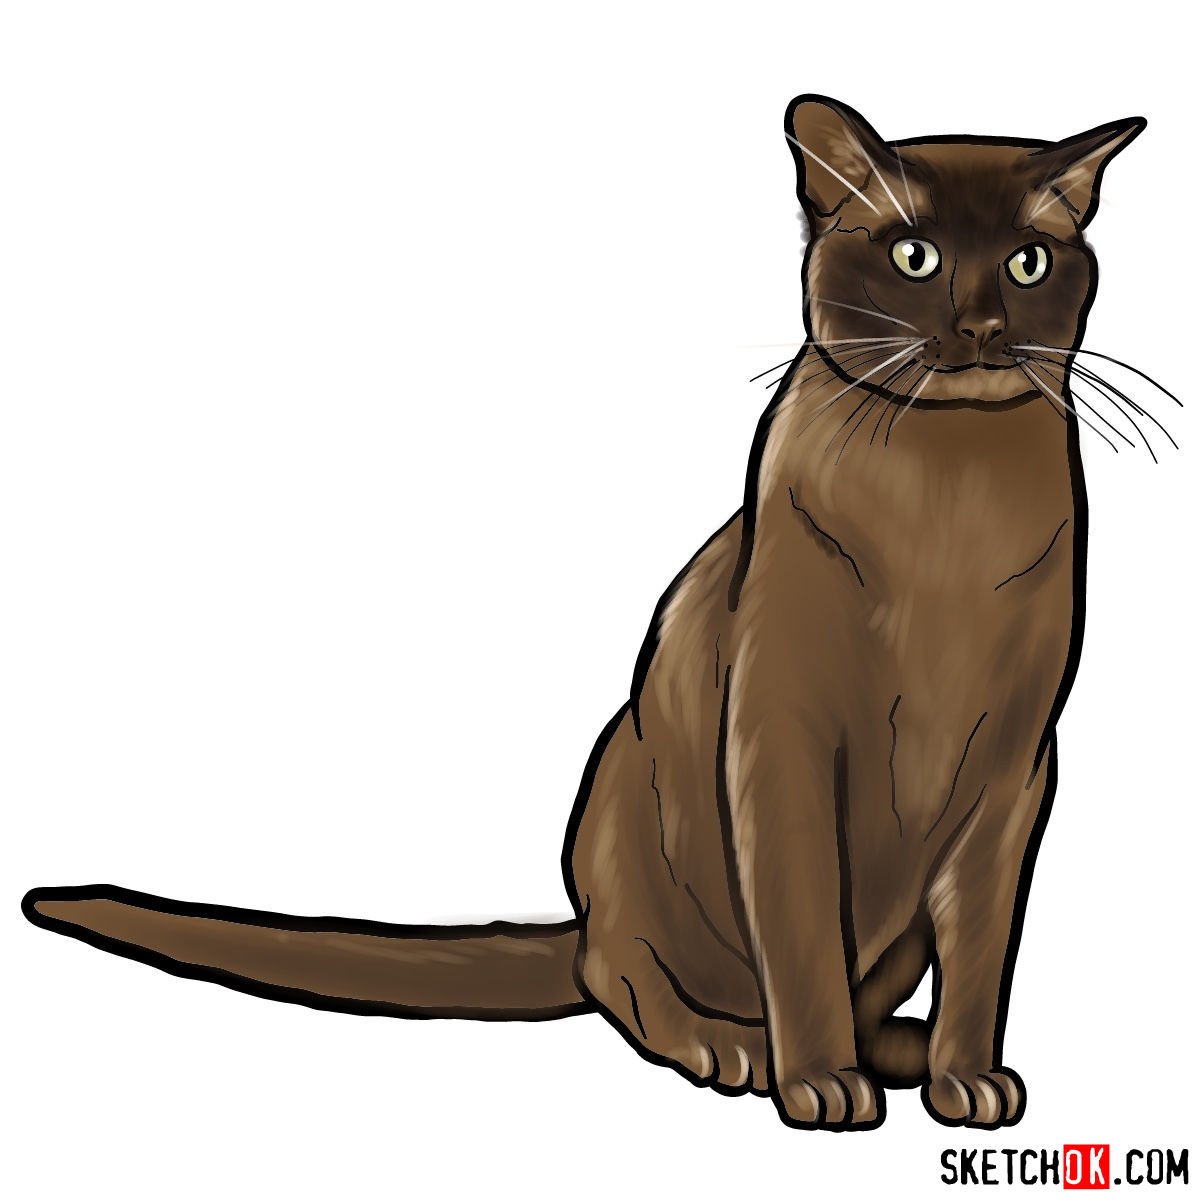 How to draw the Burmese cat